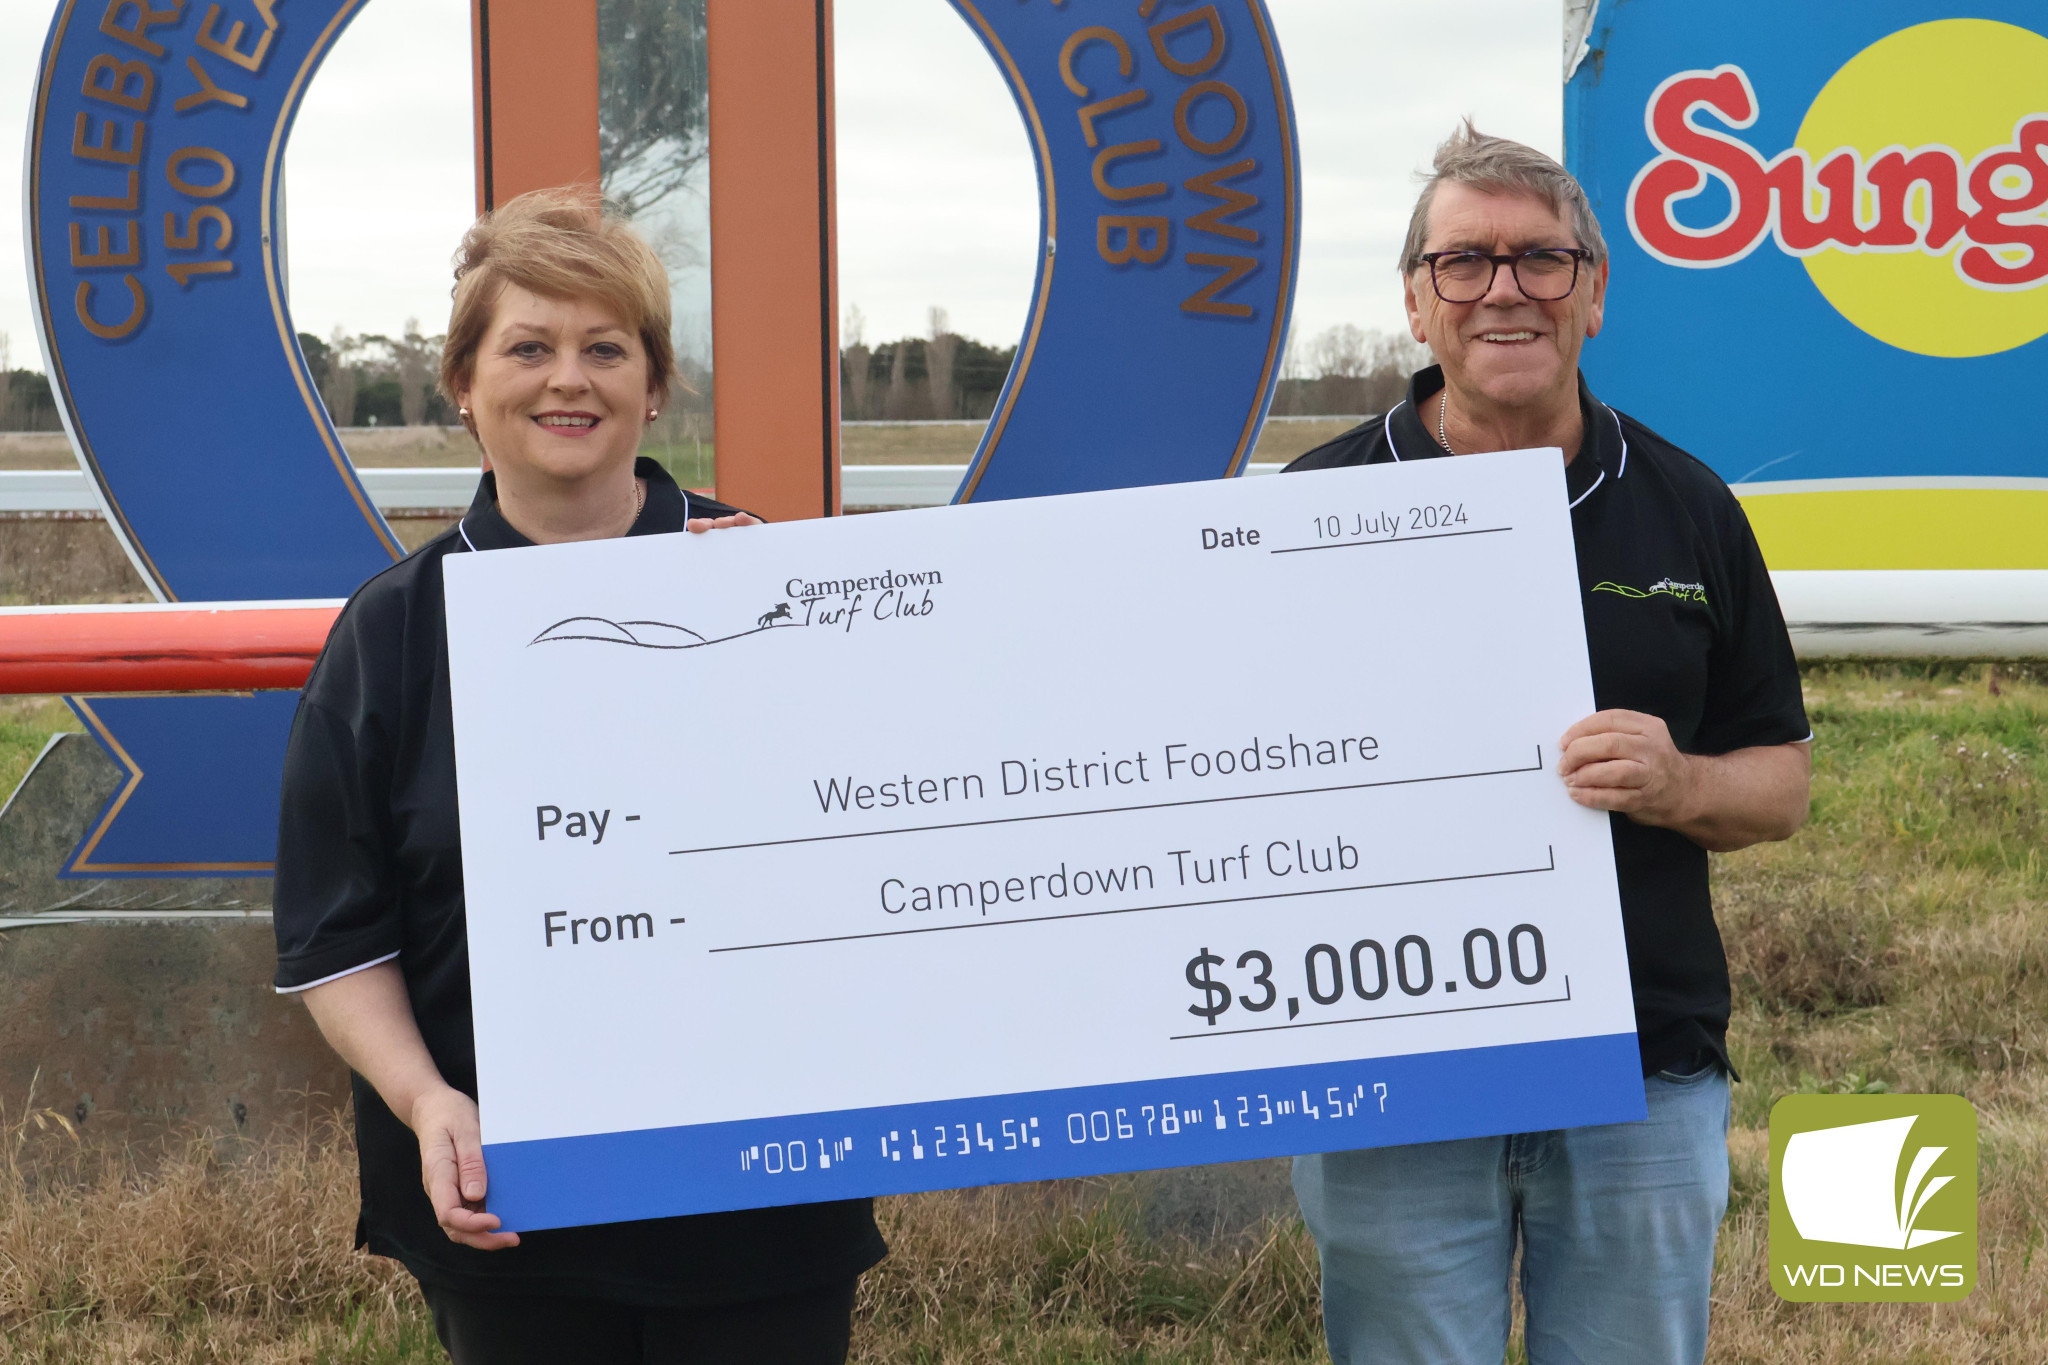 Helping those in need: Camperdown Turf Club vice president Rose Henry and president Anthony Finn recently made a donation to Western District Foodshare.